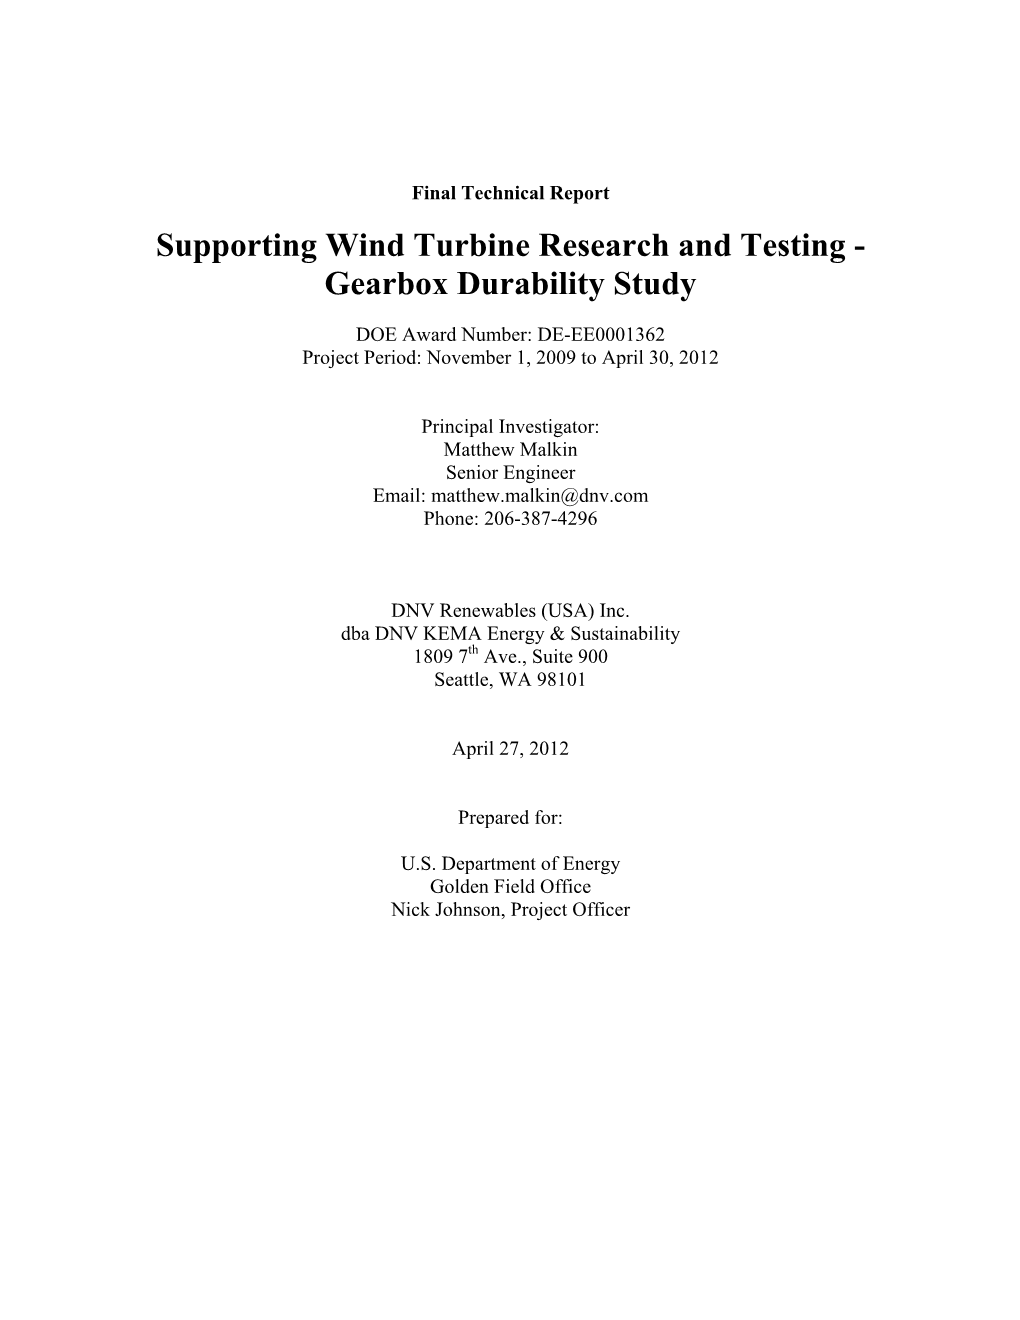 Supporting Wind Turbine Research and Testing - Gearbox Durability Study